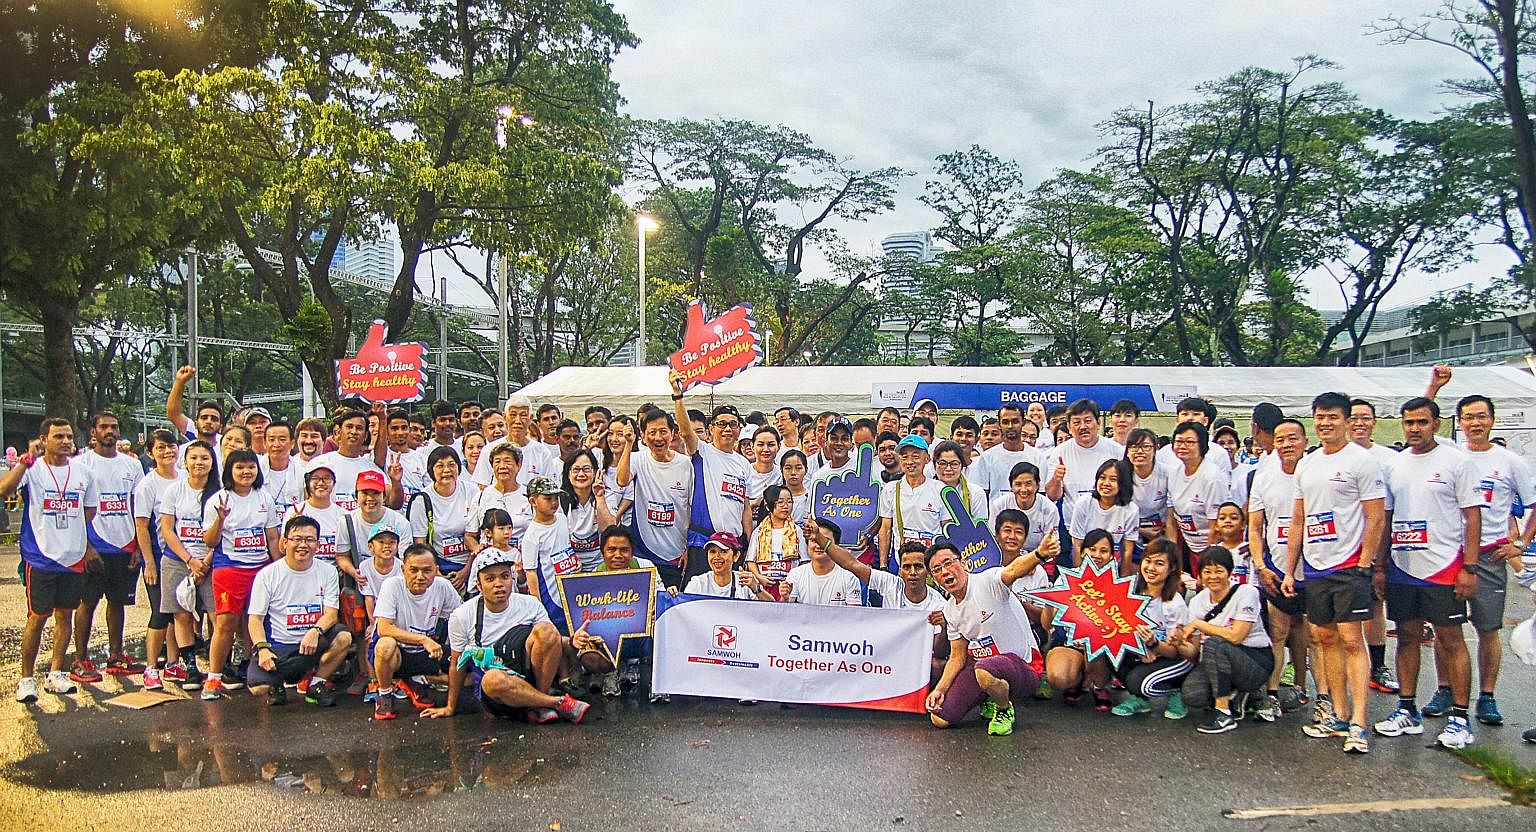 Samwoh employees at last year's ST Run. The firm is participating in the event for the second year running.